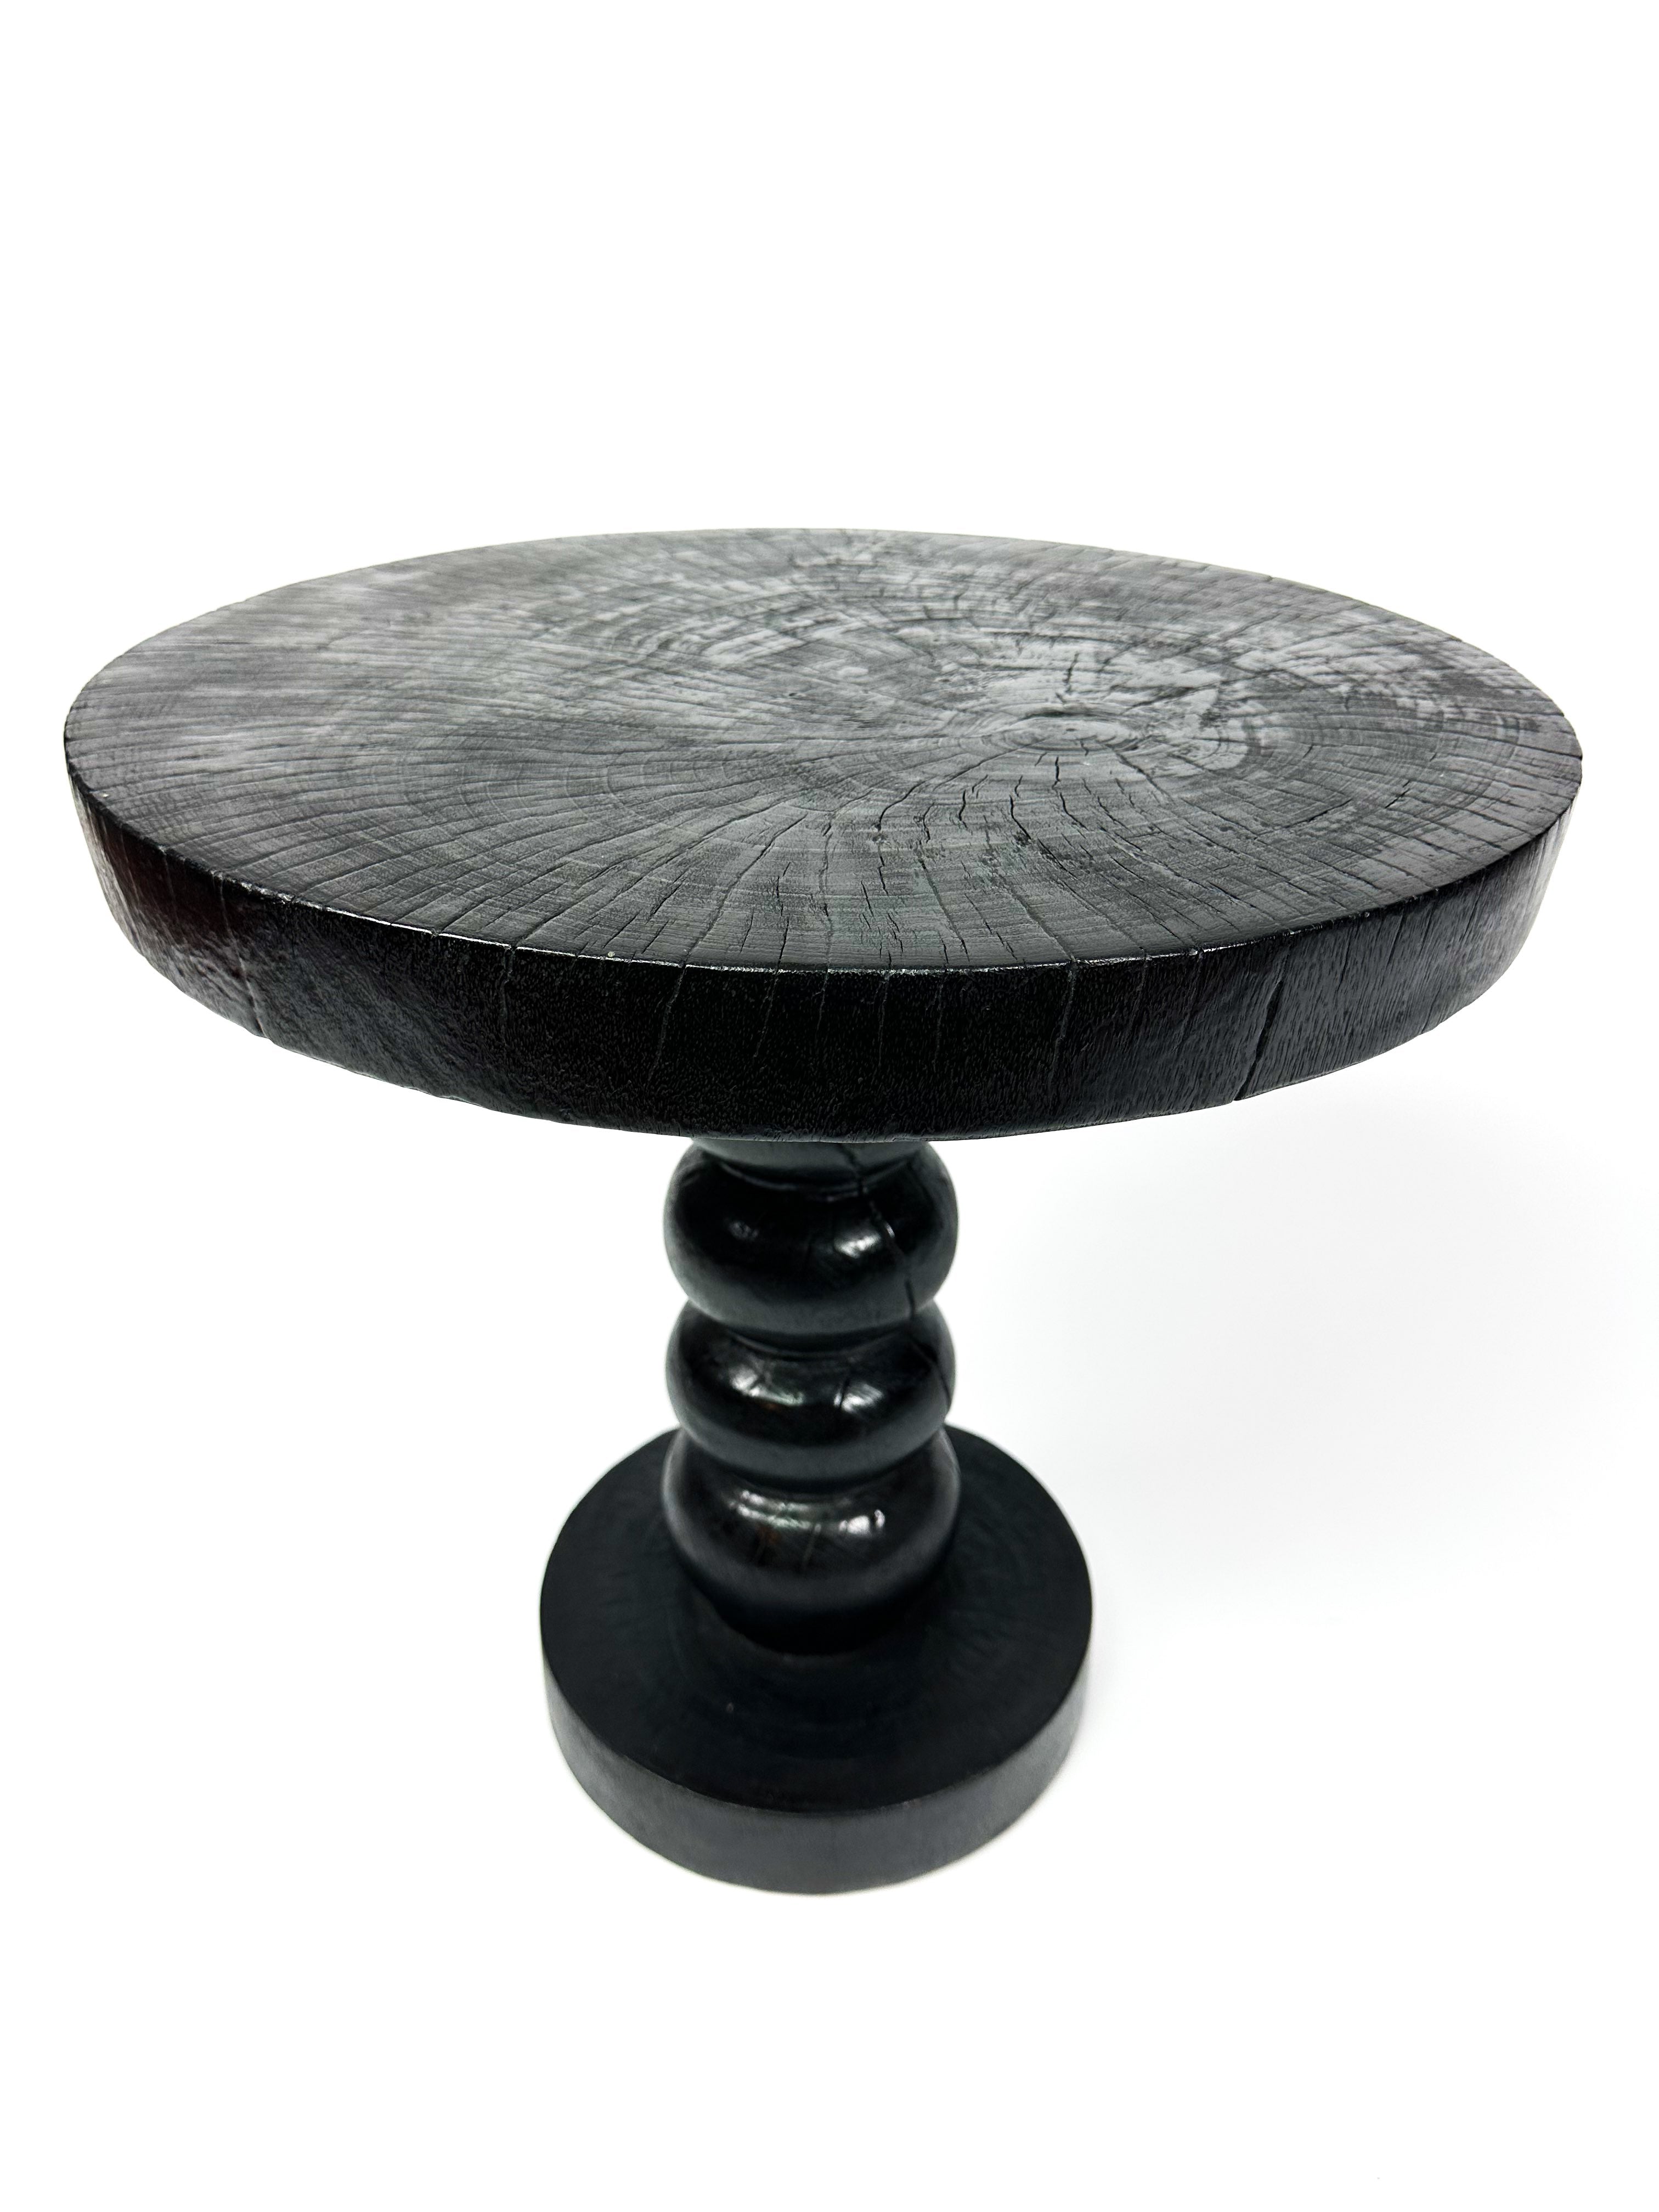 The black twisted round table